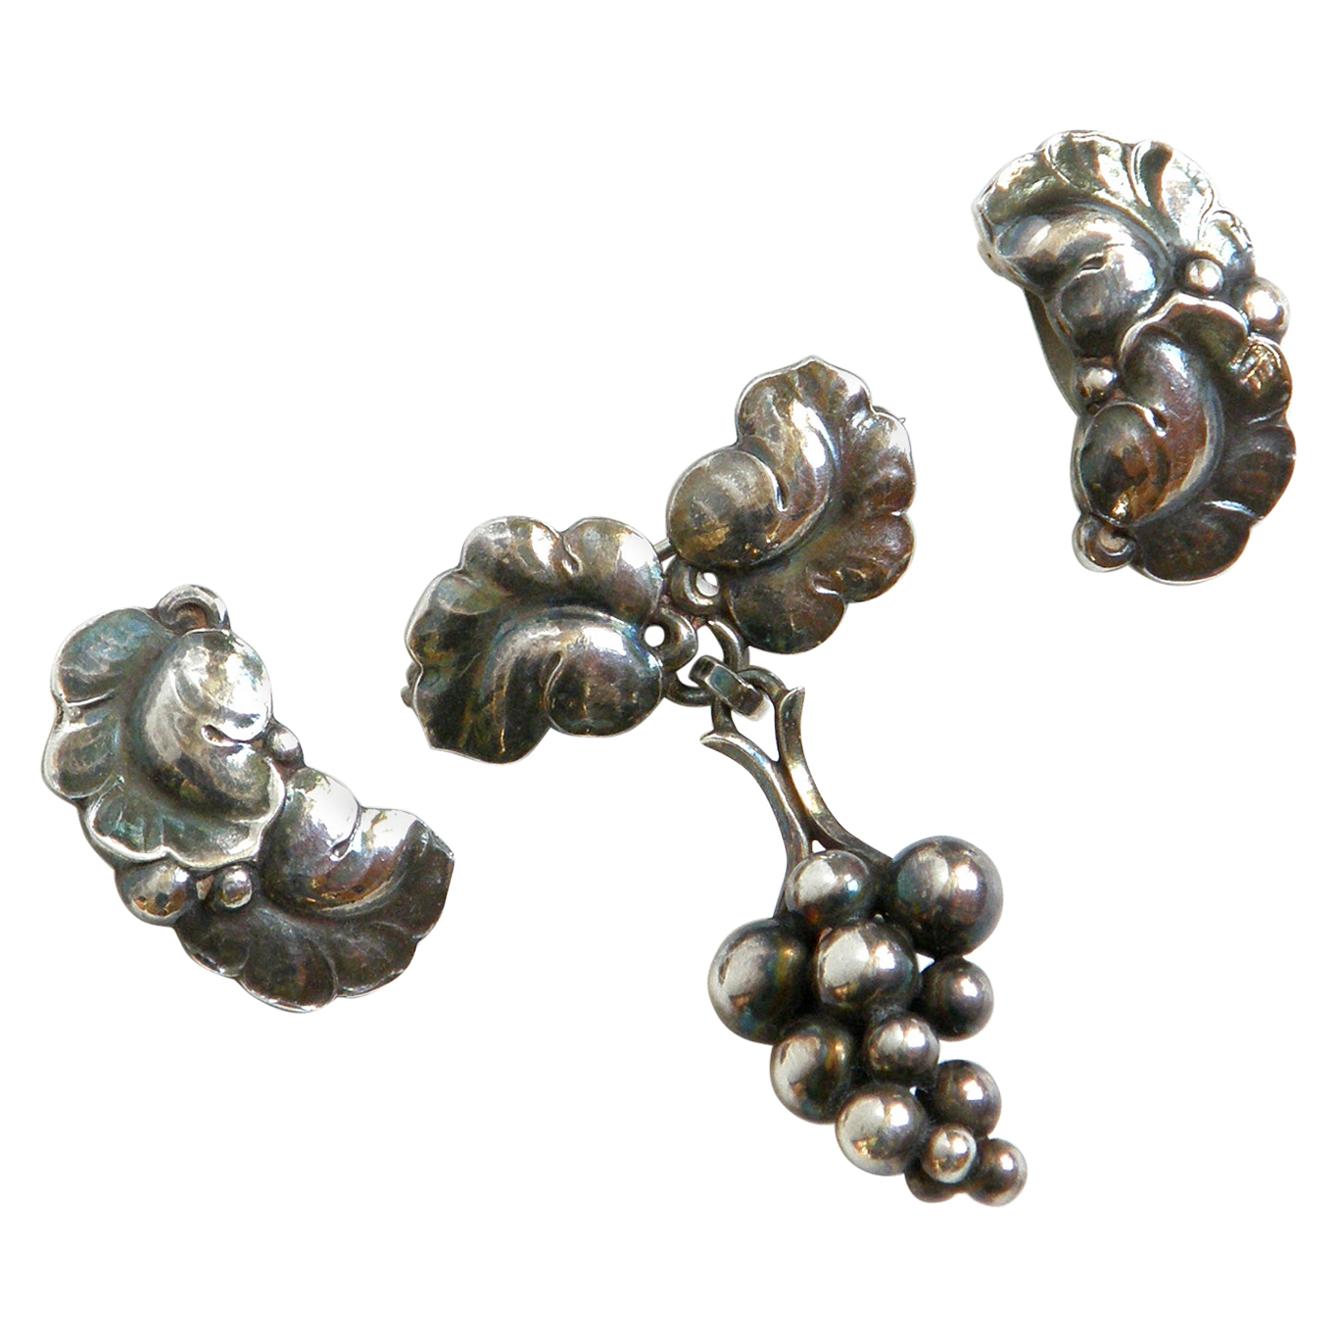 Georg Jensen Sterling Grapes and Leaves Brooch and Earrings Made in Denmark